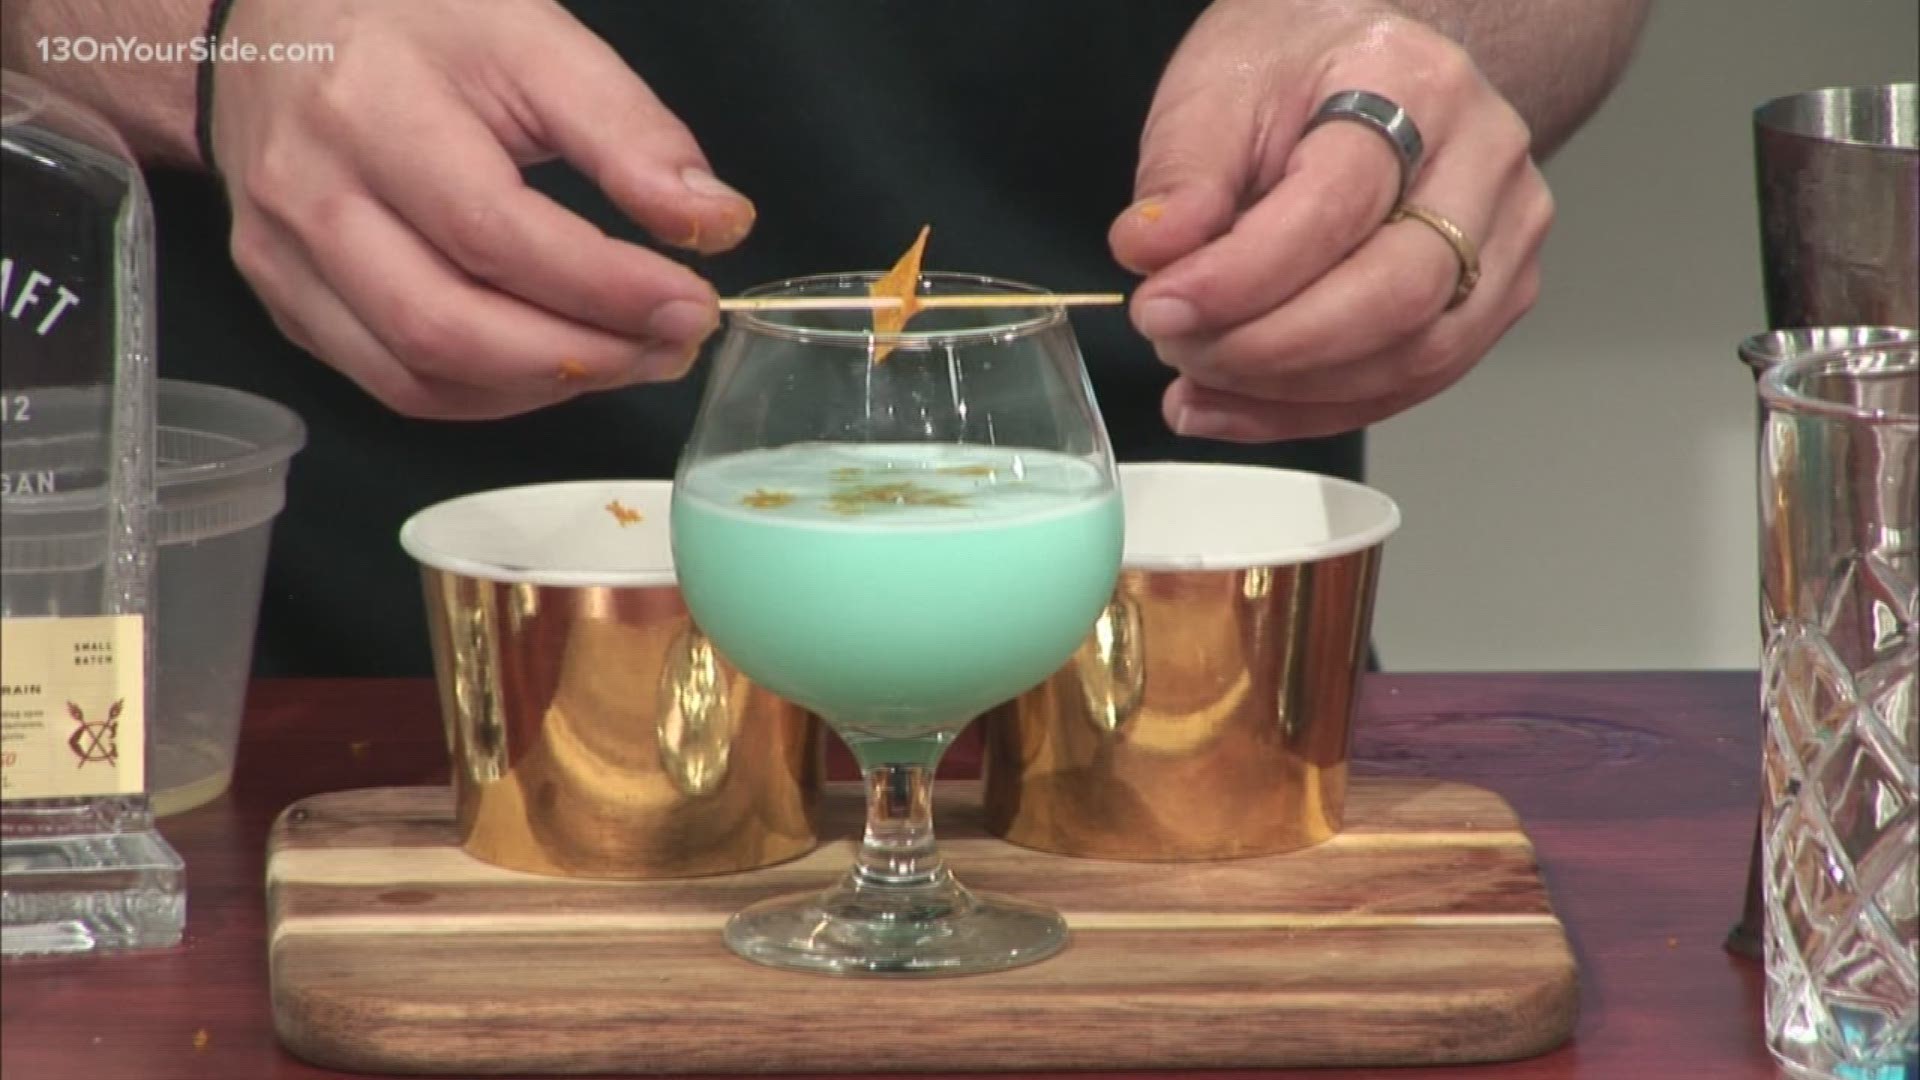 As if watching a series "so good you'll scream" wasn't exciting enough. For Thirsty Thursday, we thought we'd team up with our friends at Coppercraft Distillery in Holland and Saugatuck to mix up some shark-themed cocktails.